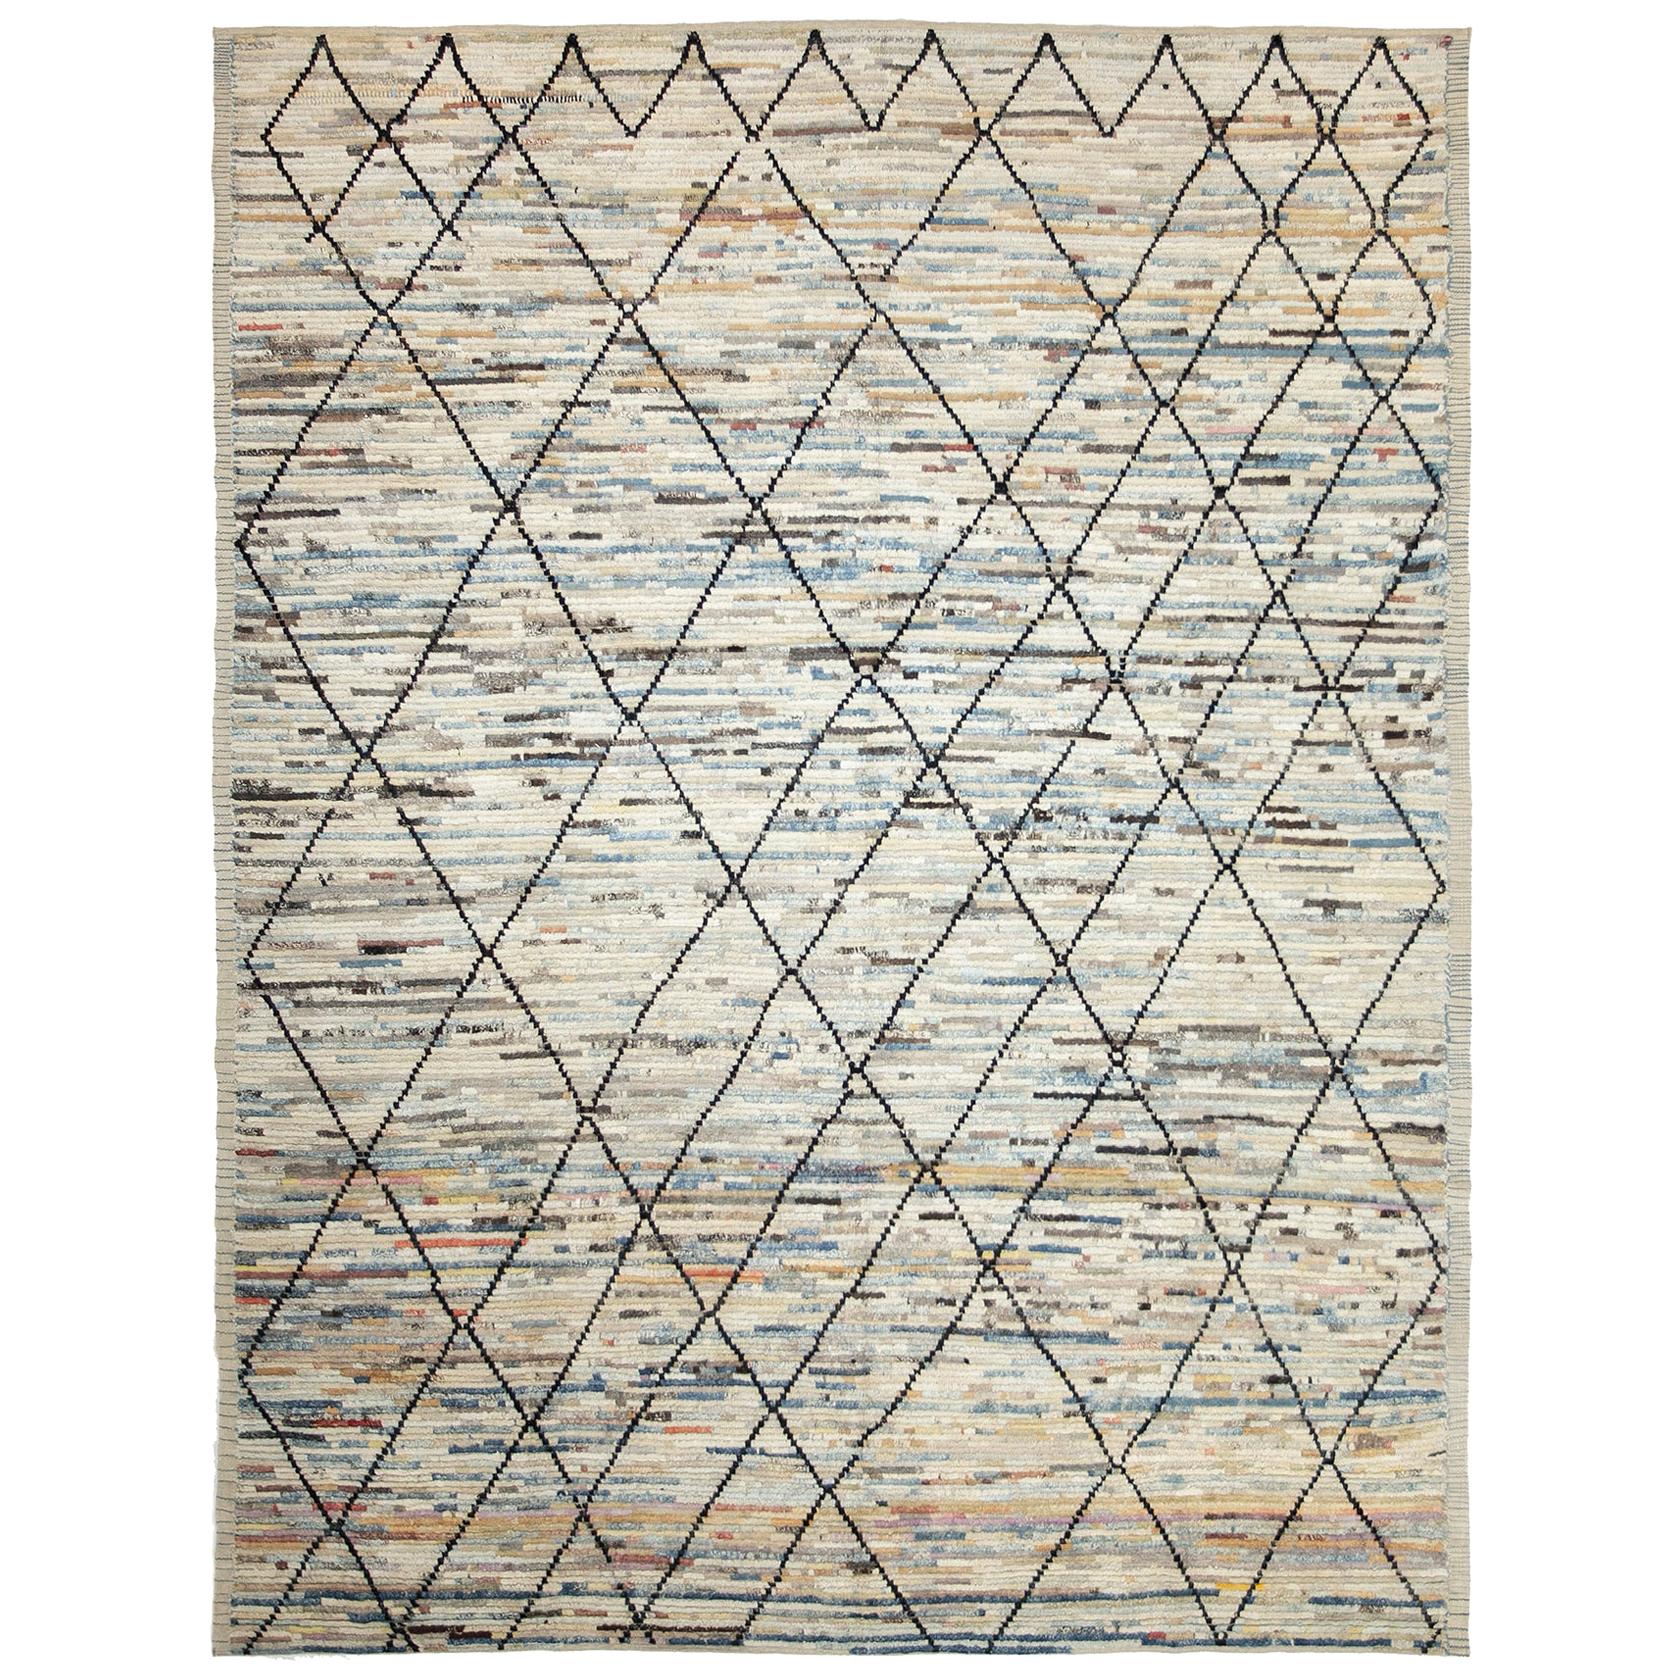 Nazmiyal Collection Berber Design Modern Moroccan Style Rug 9ft 2 in x 11 t 8 in